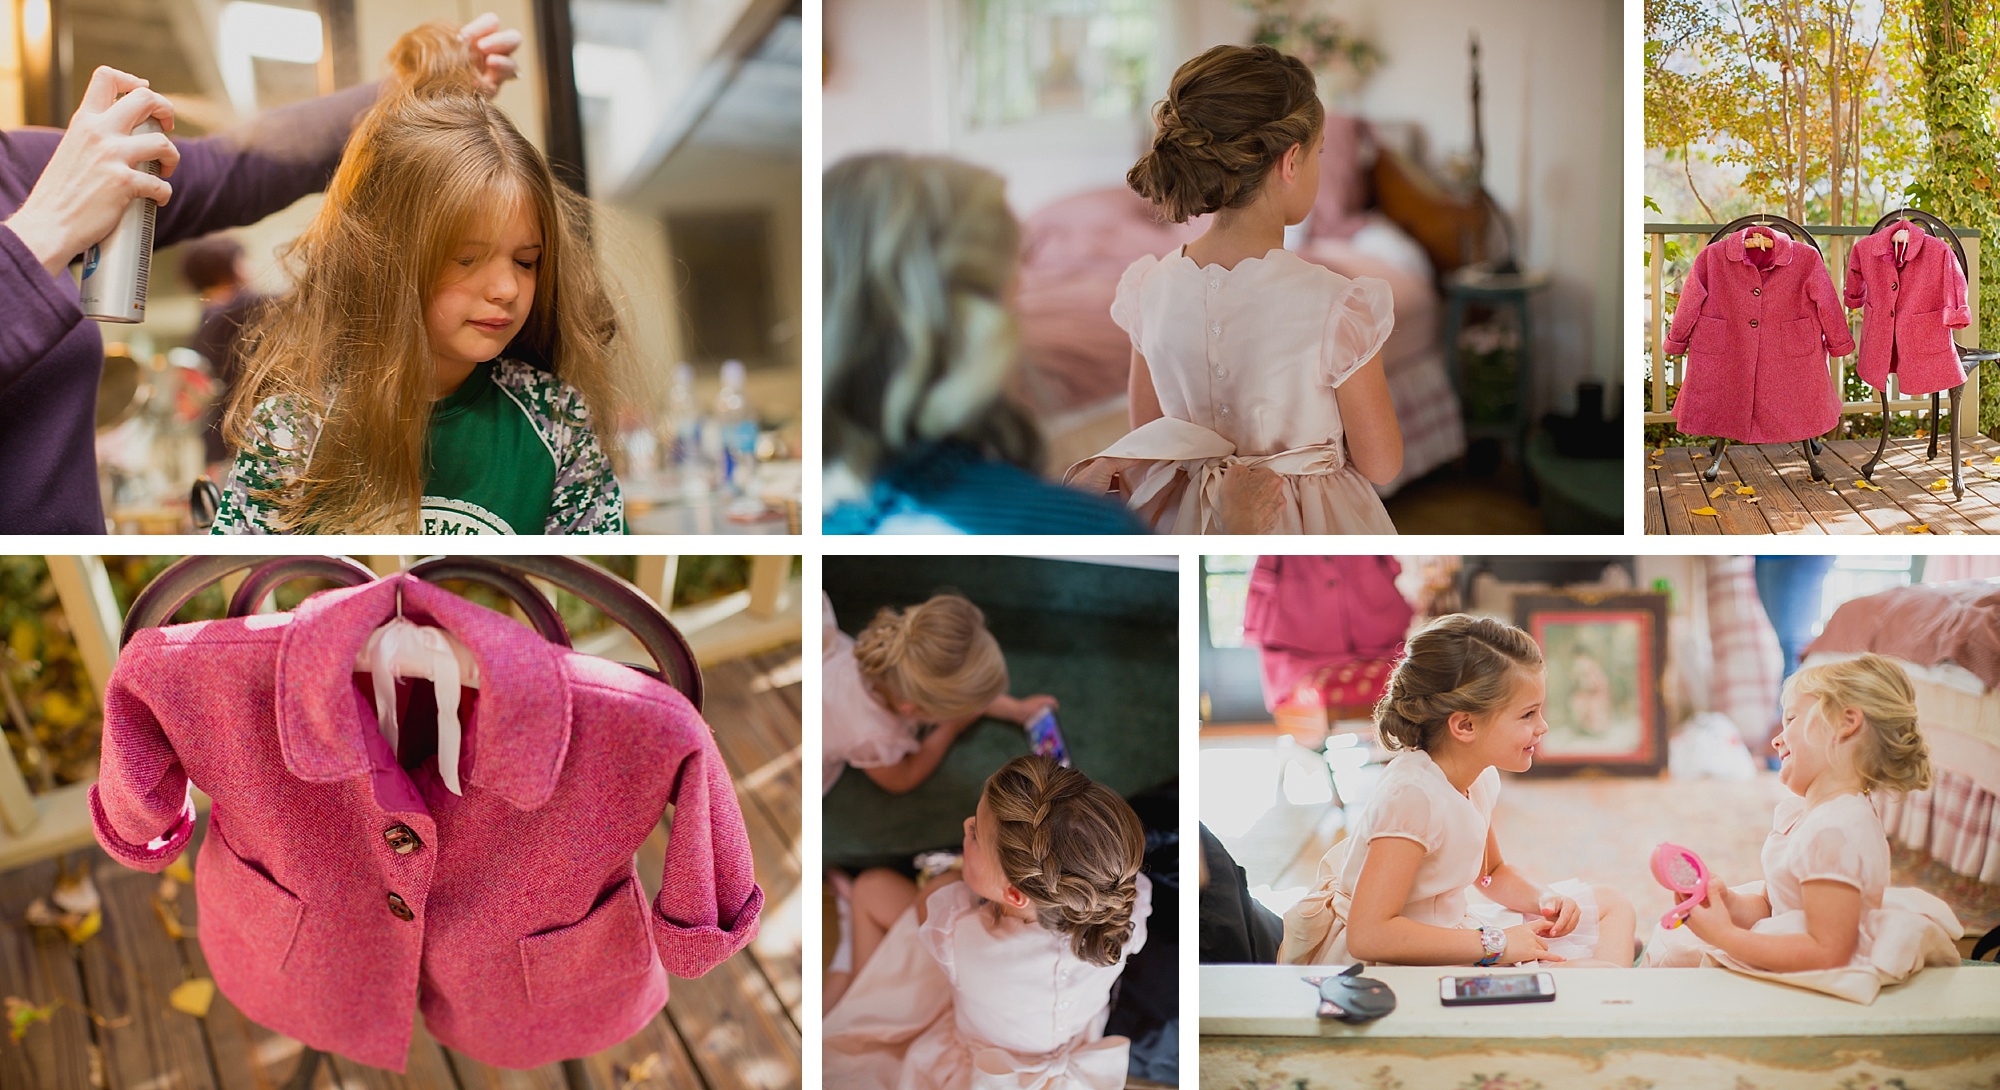 A collage of images of the flower girls. One girl closes her eyes while getting hairspray. Their pink handmade coats hang on chairs on the back patio. Their hair is both done in braided up-dos and the play together in their handmade pink dresses.